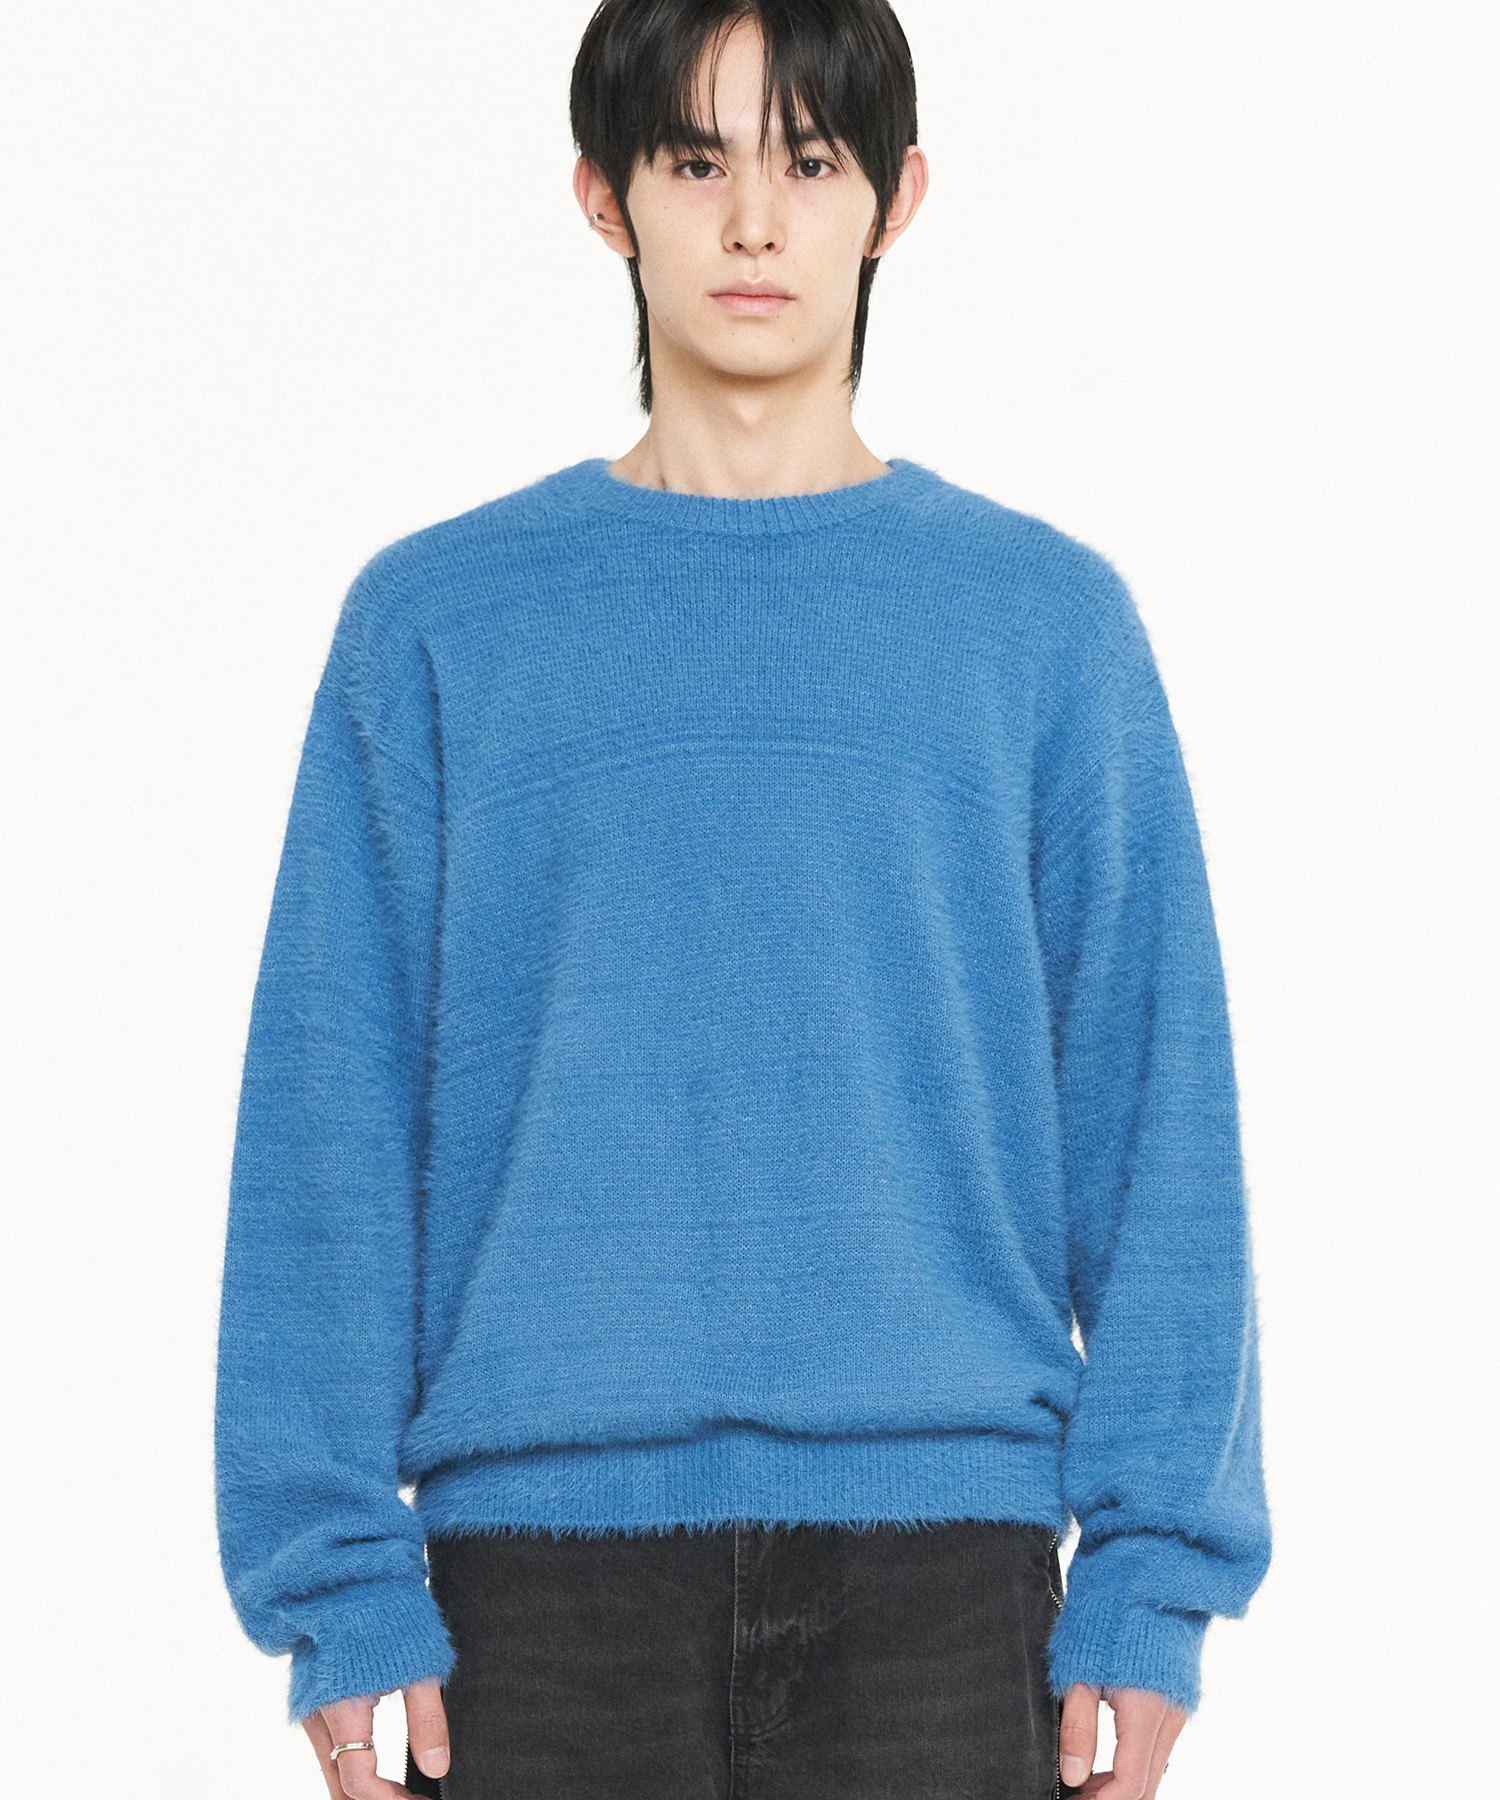 Nomad Hairy Knit LAPIS BLUE (S/S VER.)